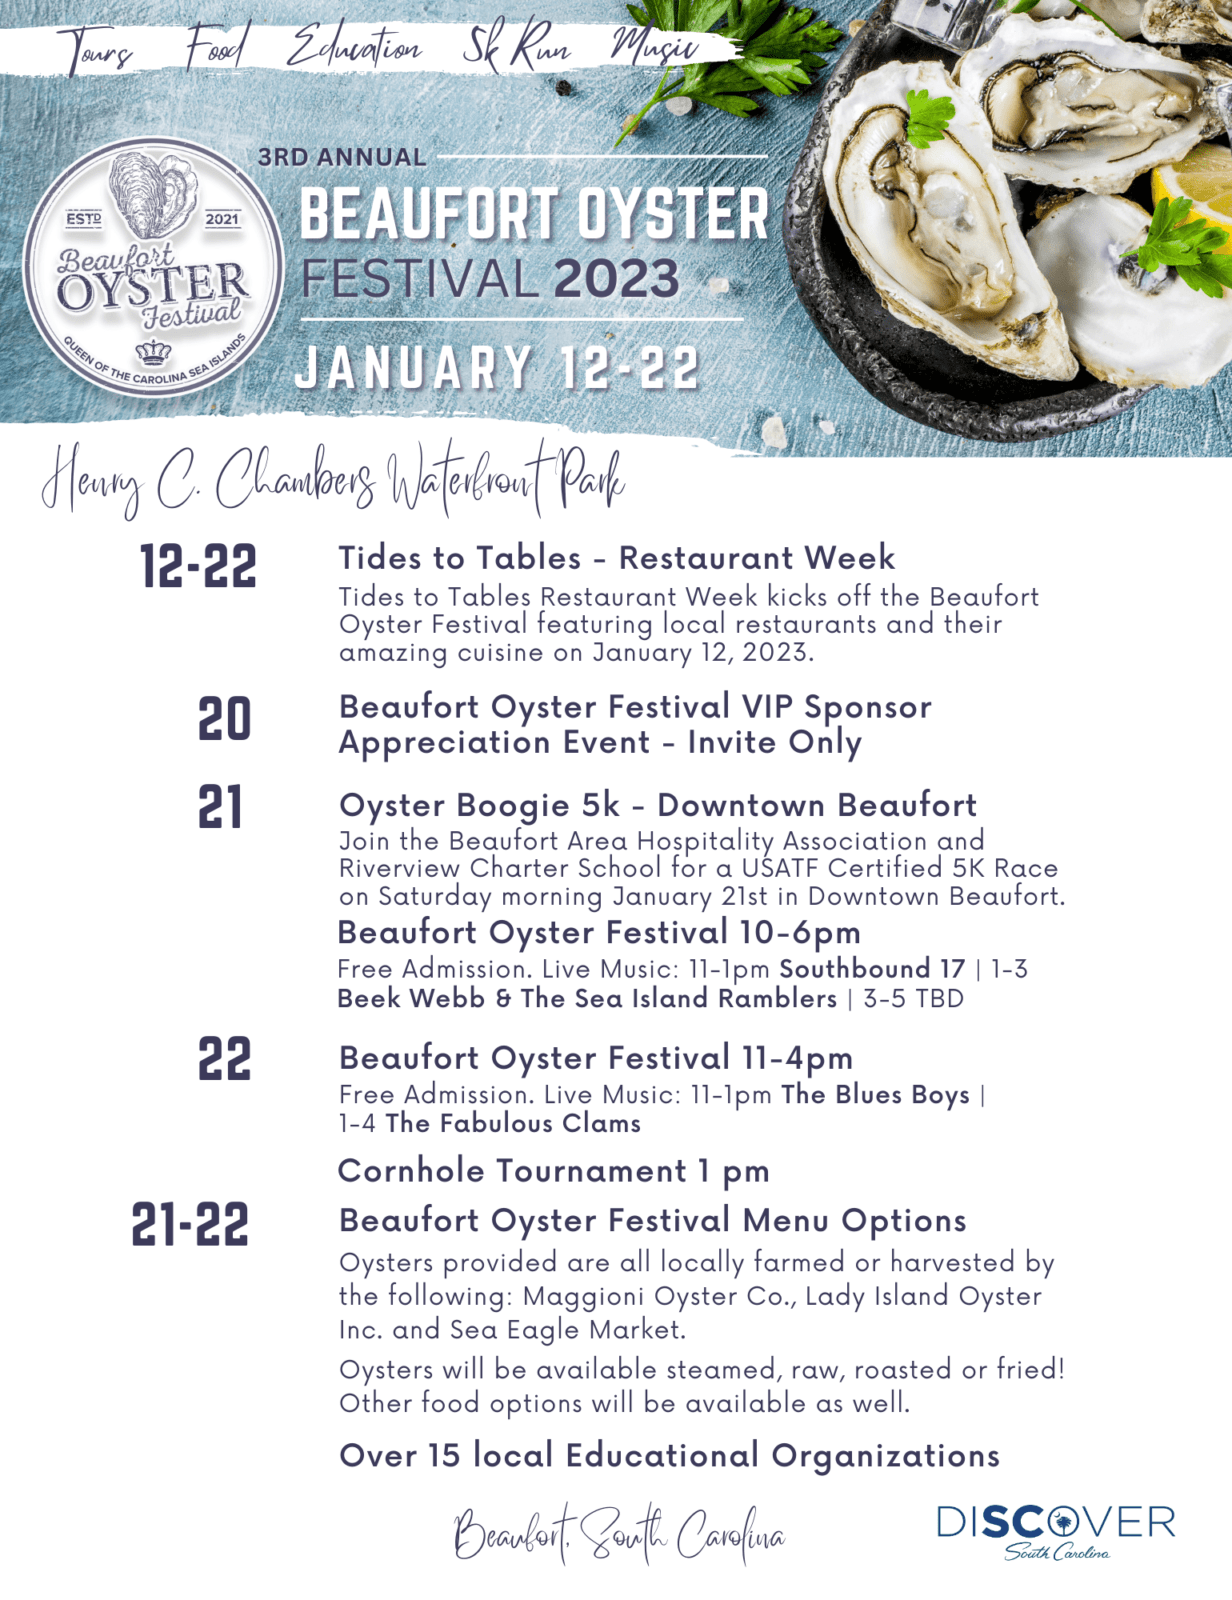 Get ready for a shuckin' good time at the 2023 Beaufort, SC Oyster Festival